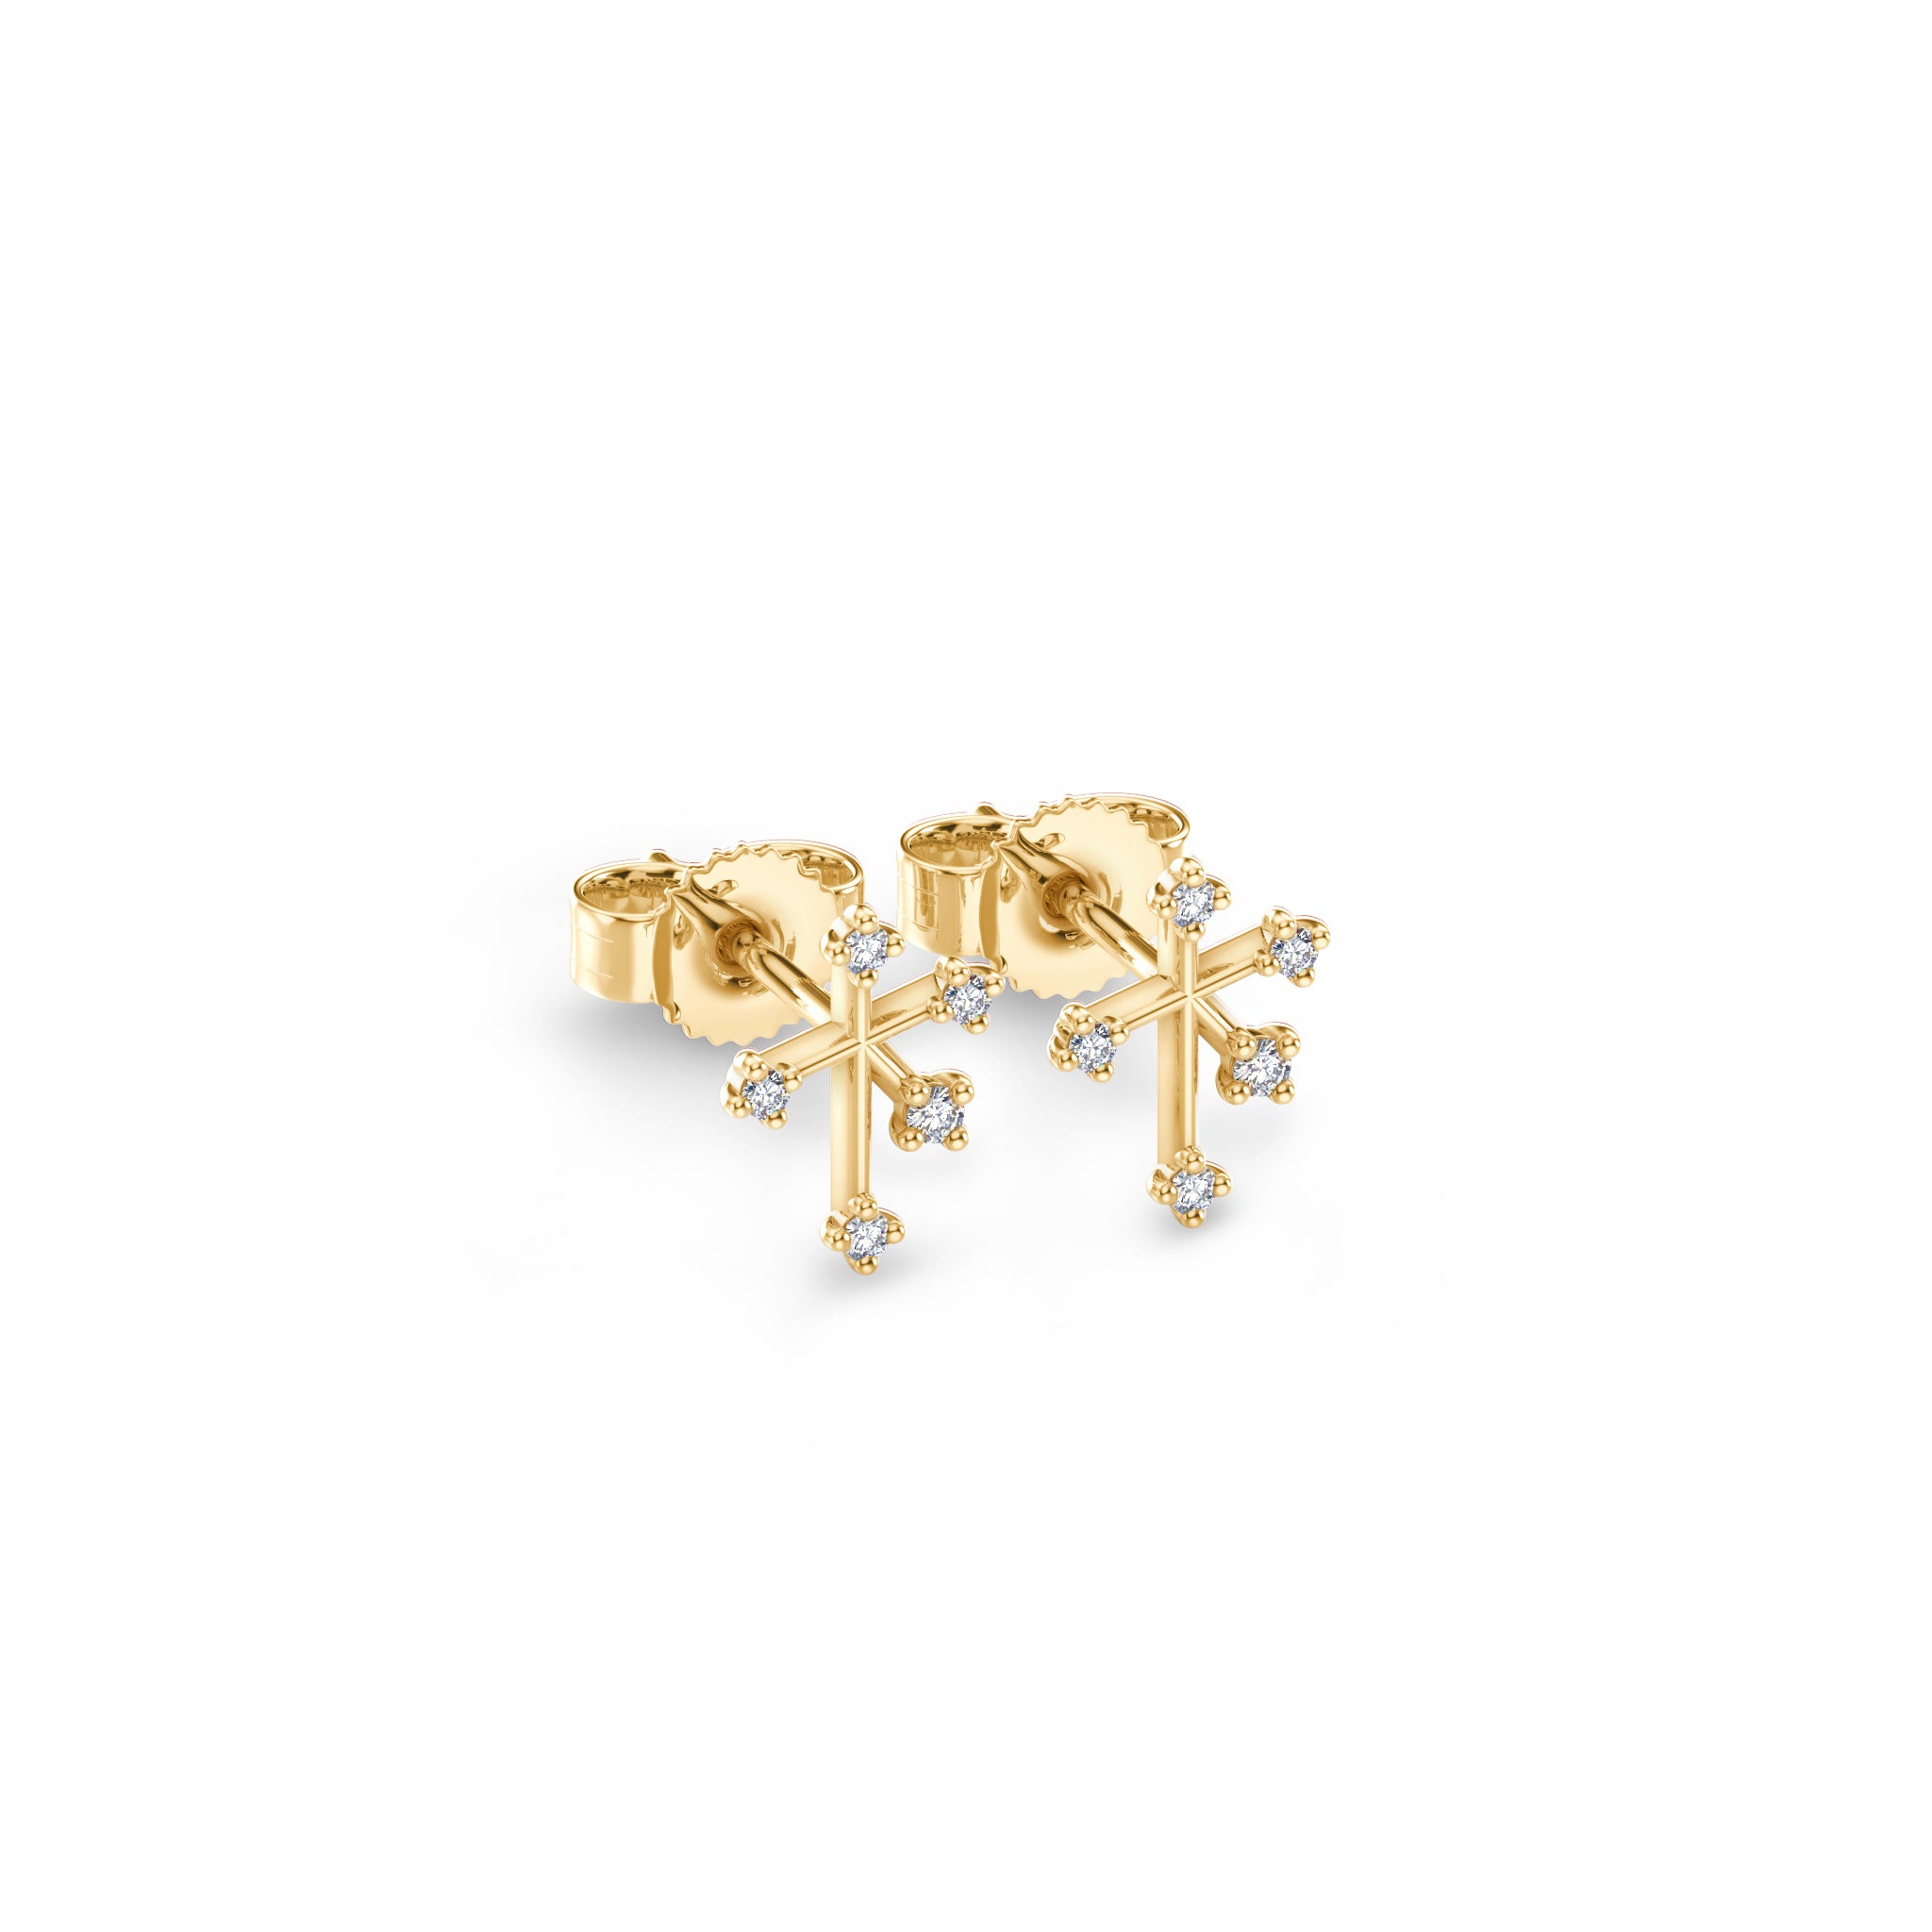 Shimansky - Southern Cross Diamond Stud Earrings Crafted in 14K Yellow Gold